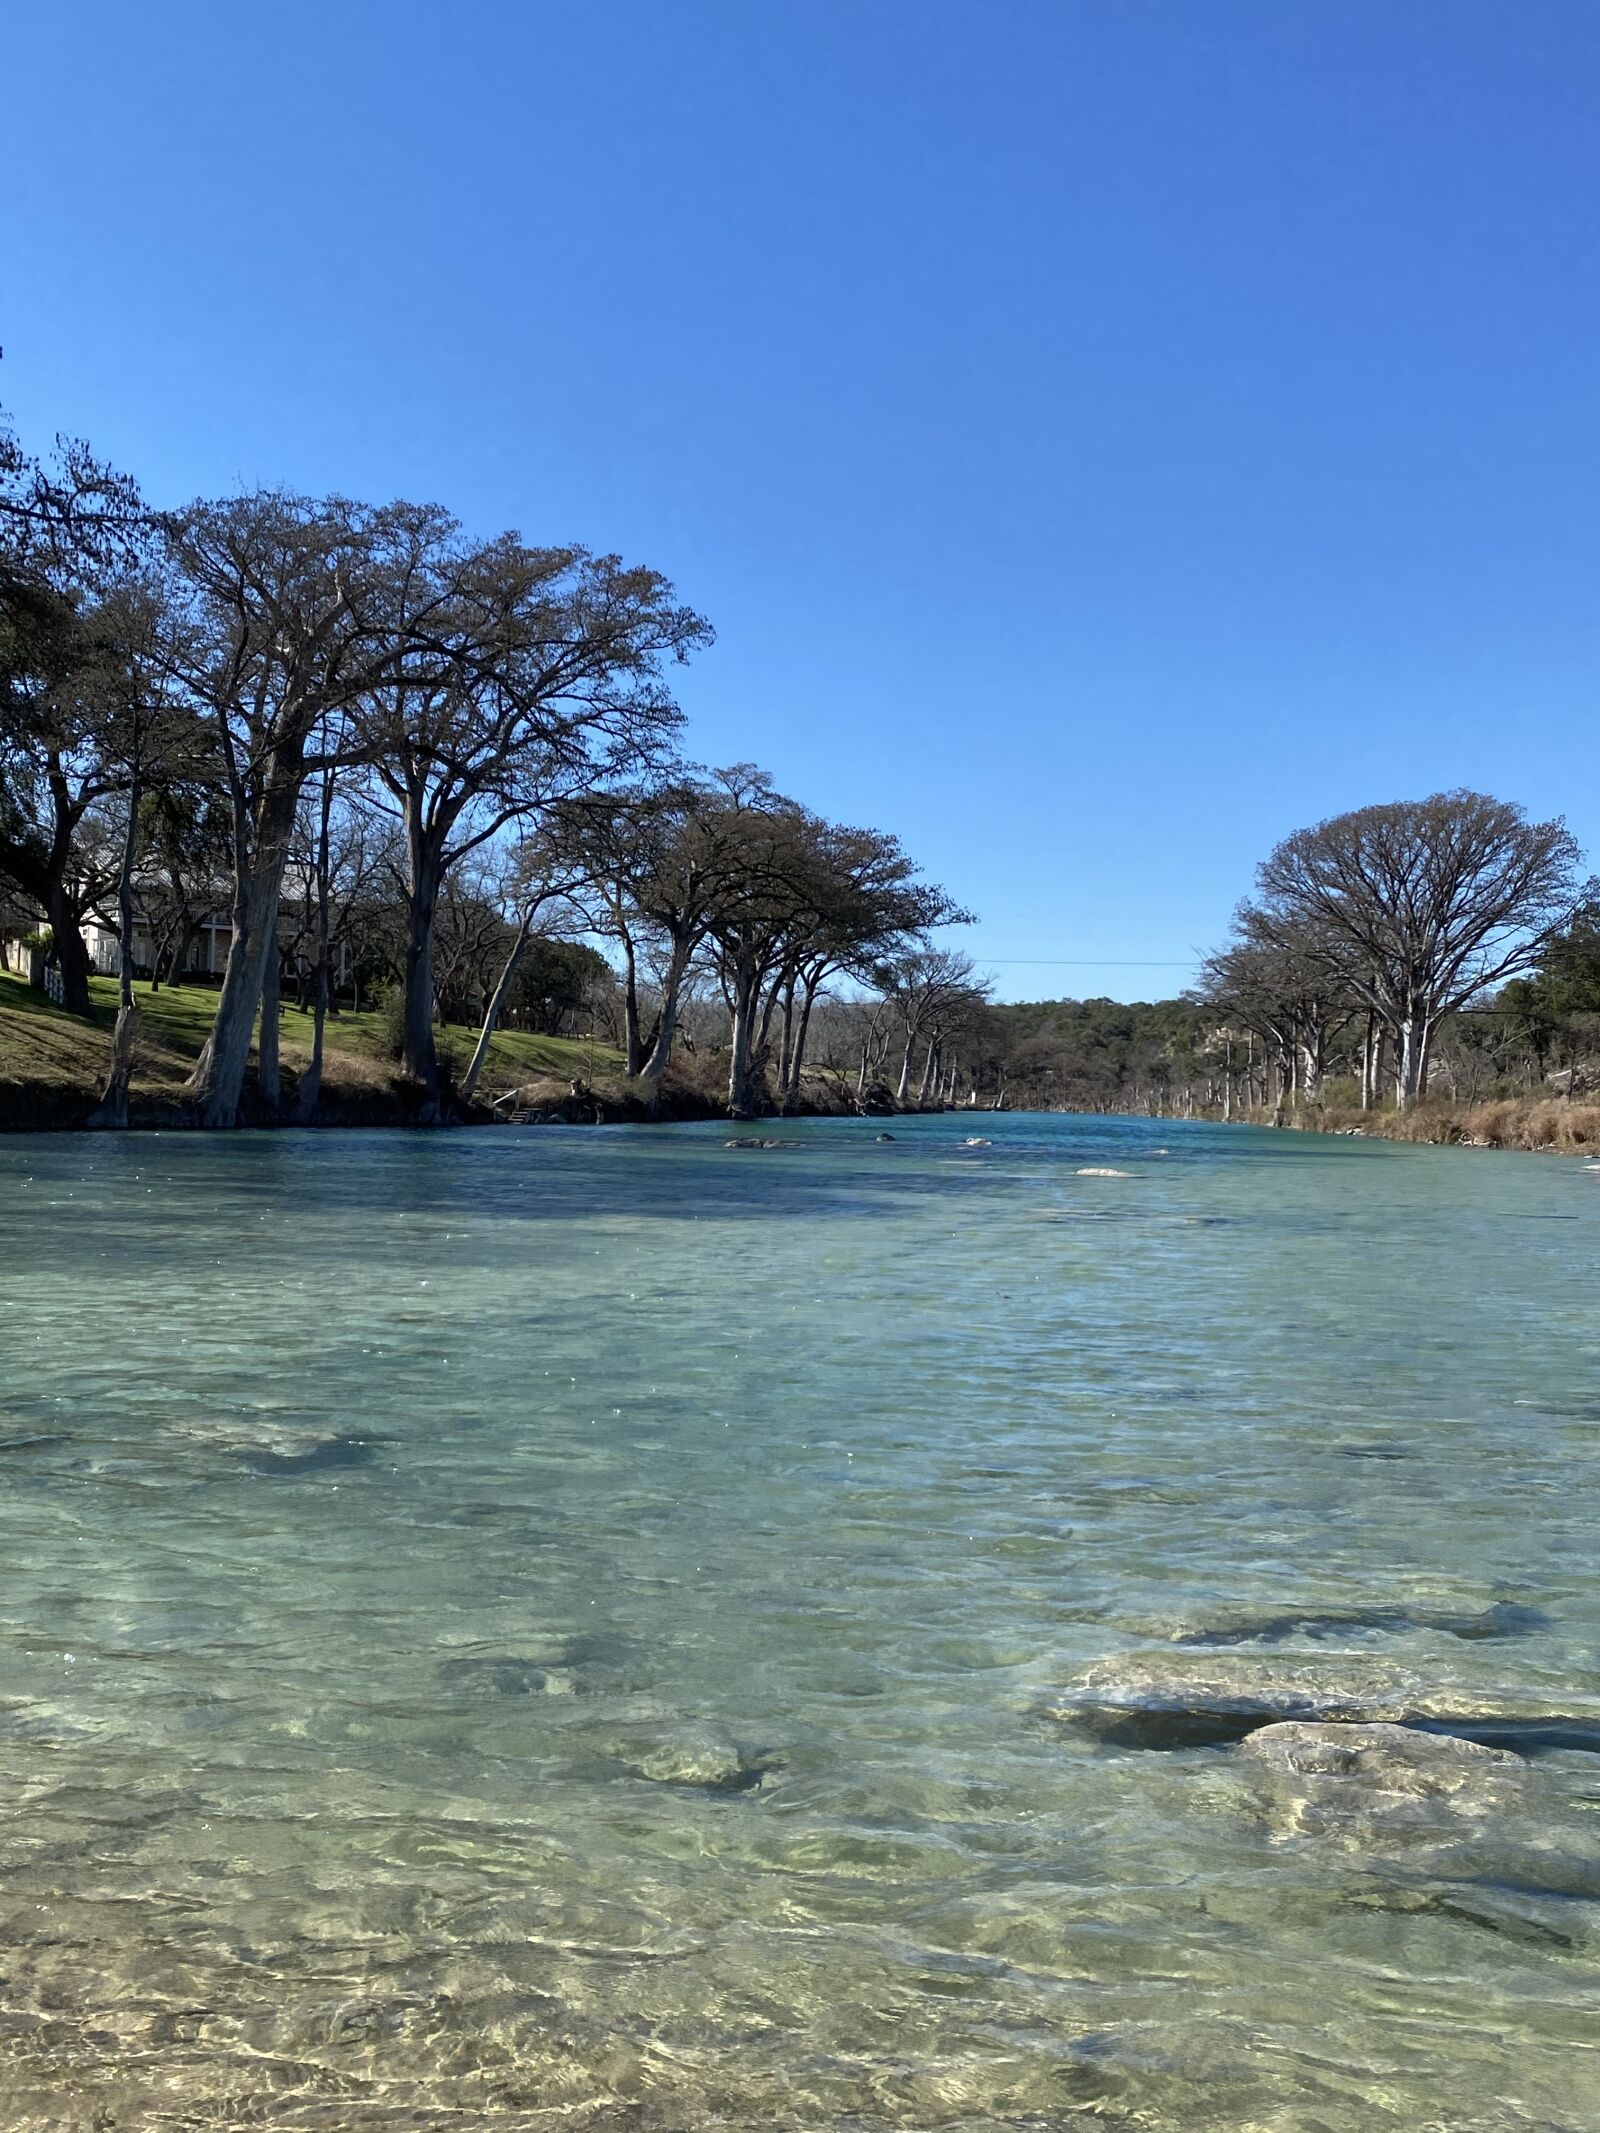 Apple iPhone 11 Pro Max sample photo. Blanco river, texas, hill photography